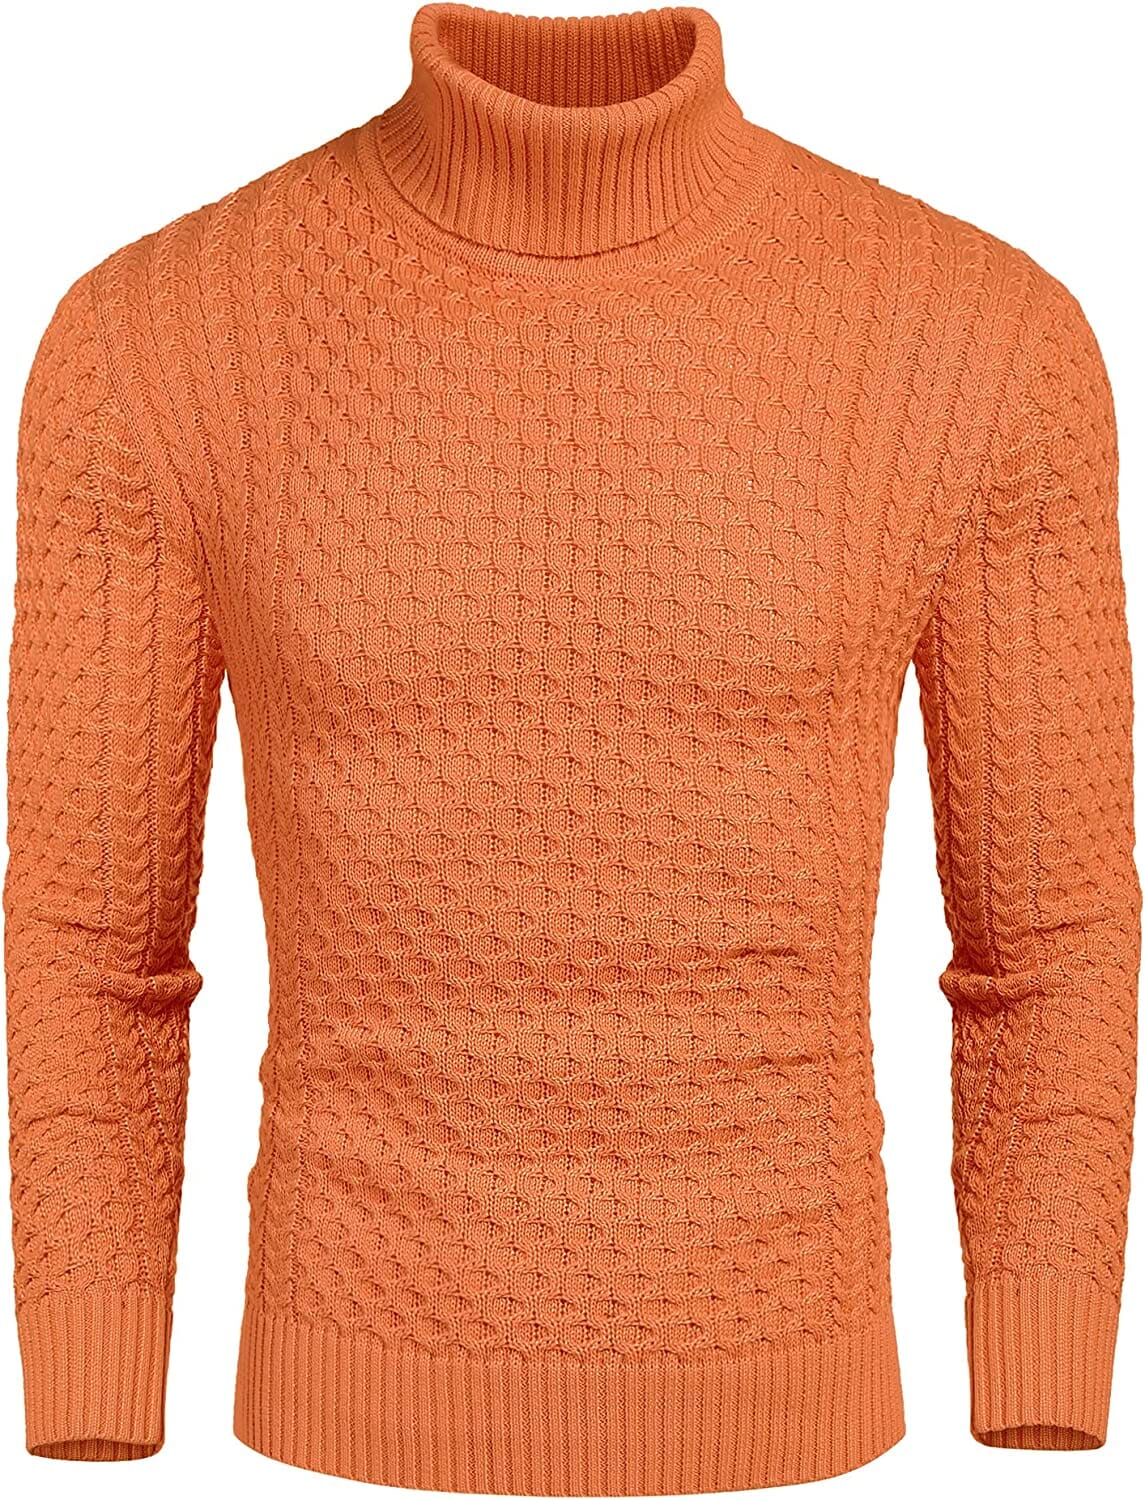 Slim Fit Turtleneck Twisted Sweater (US Only) Sweaters Coofandy's Orange S 